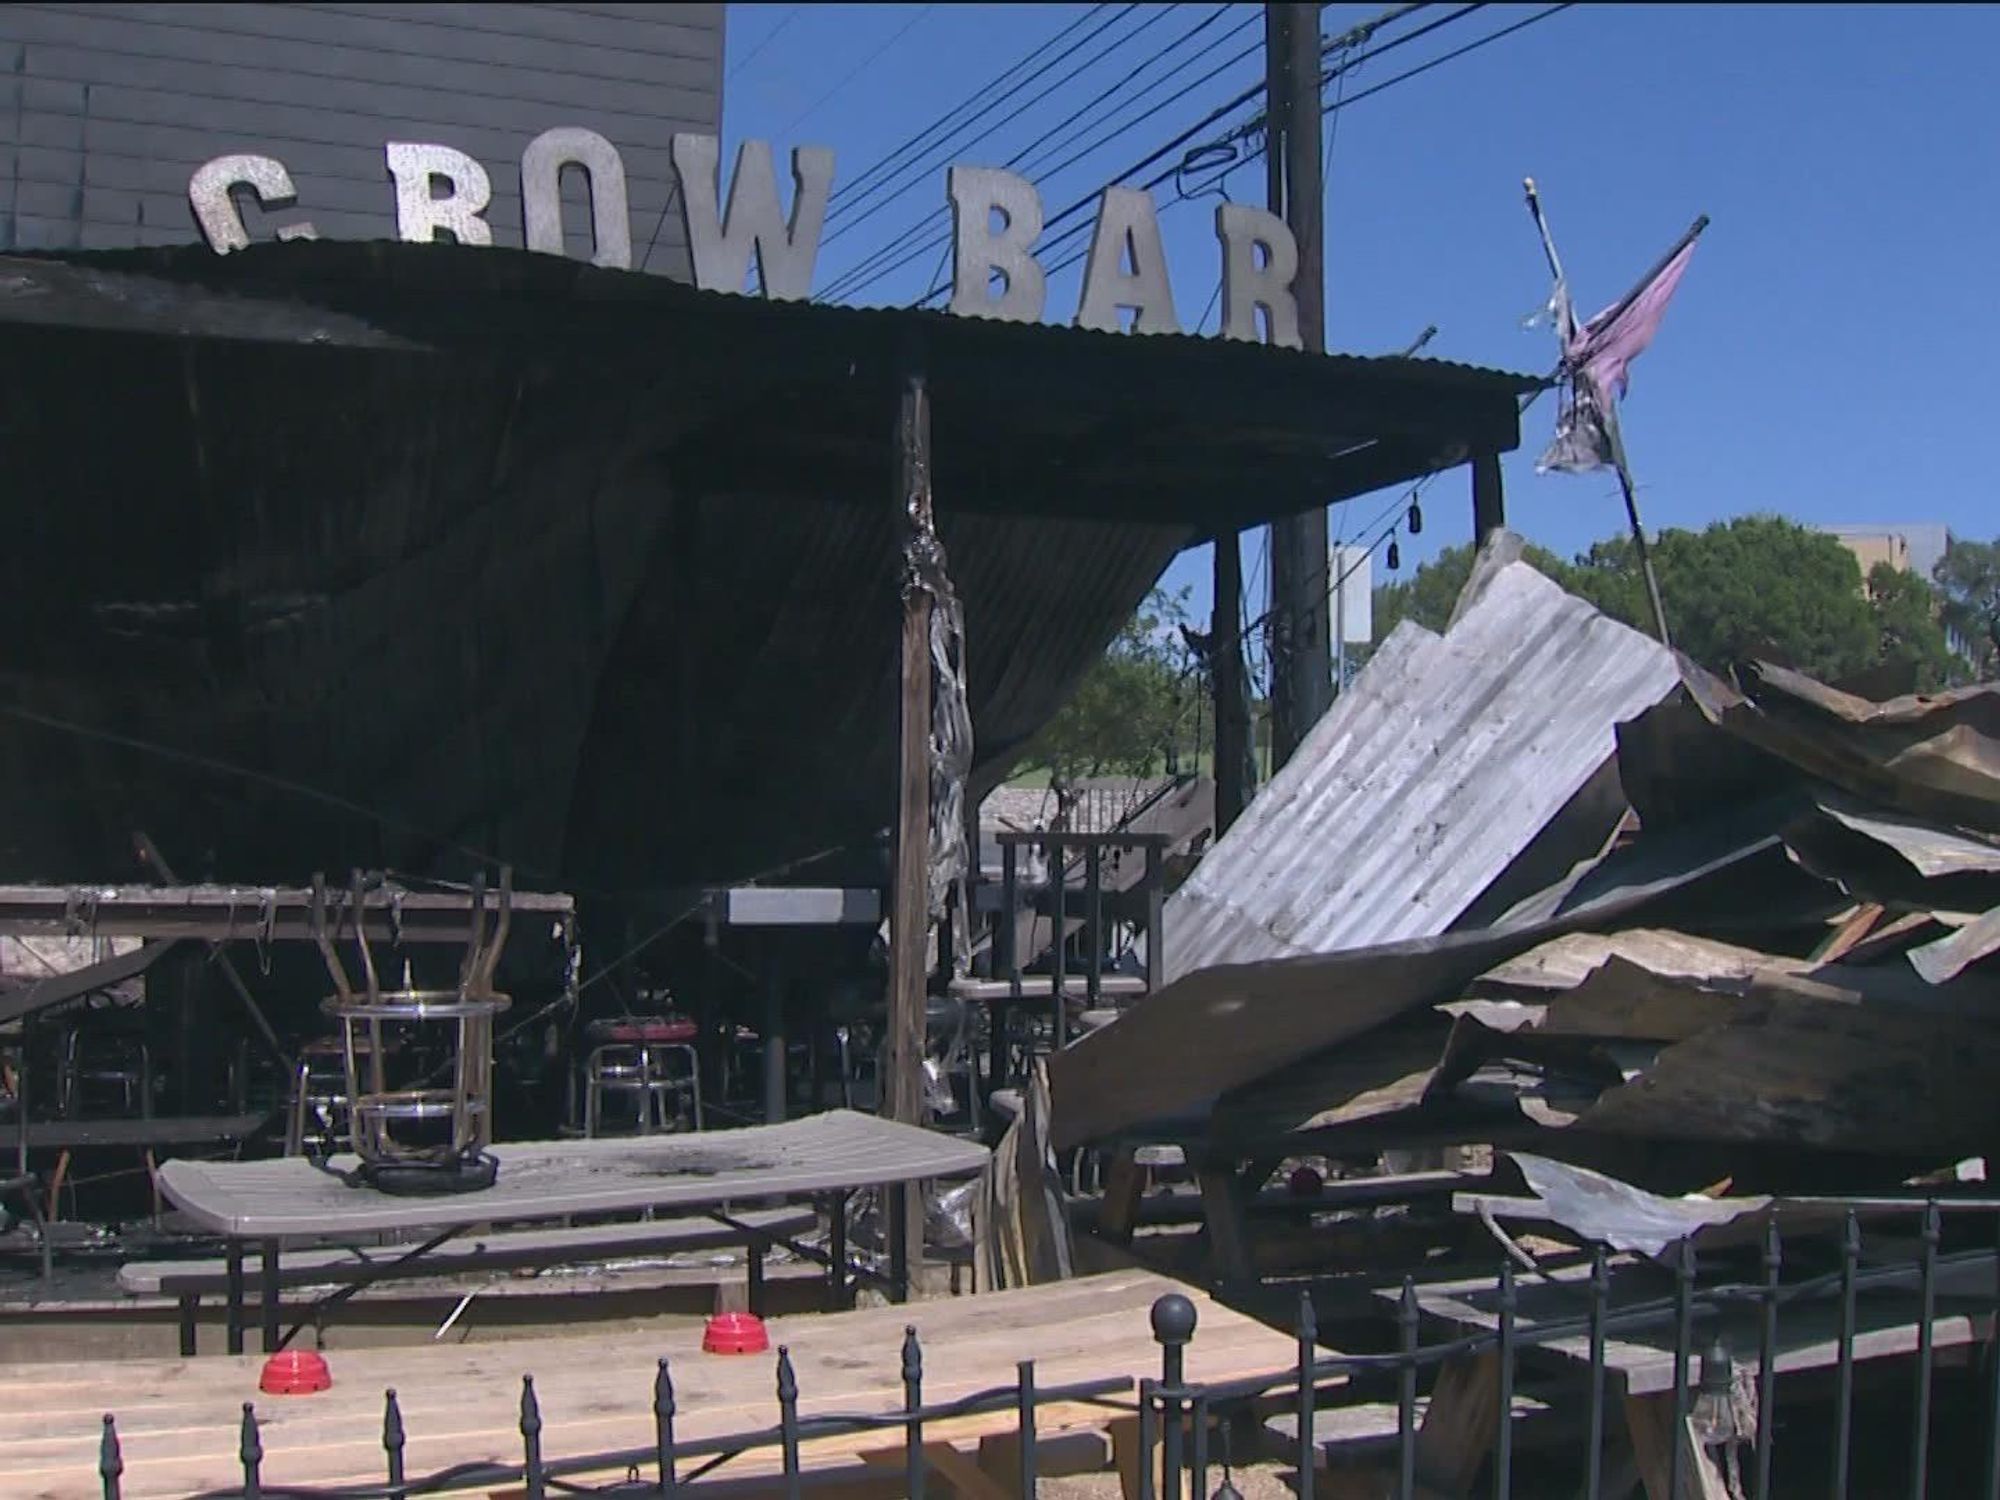 Crow Bar in Austin, destroyed by fire